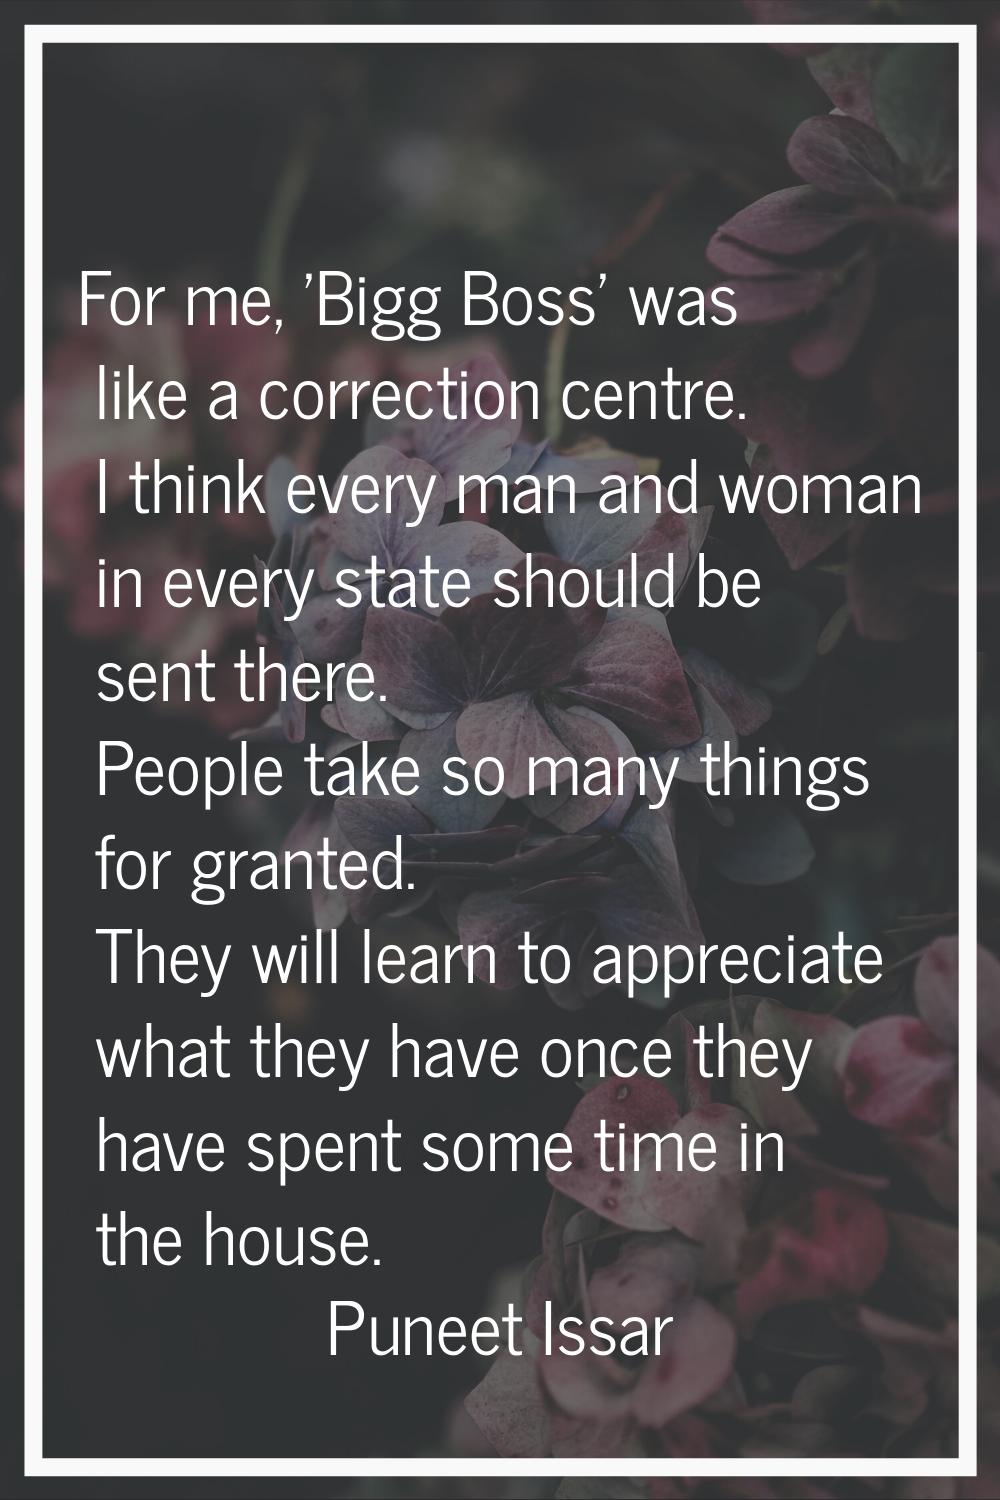 For me, 'Bigg Boss' was like a correction centre. I think every man and woman in every state should